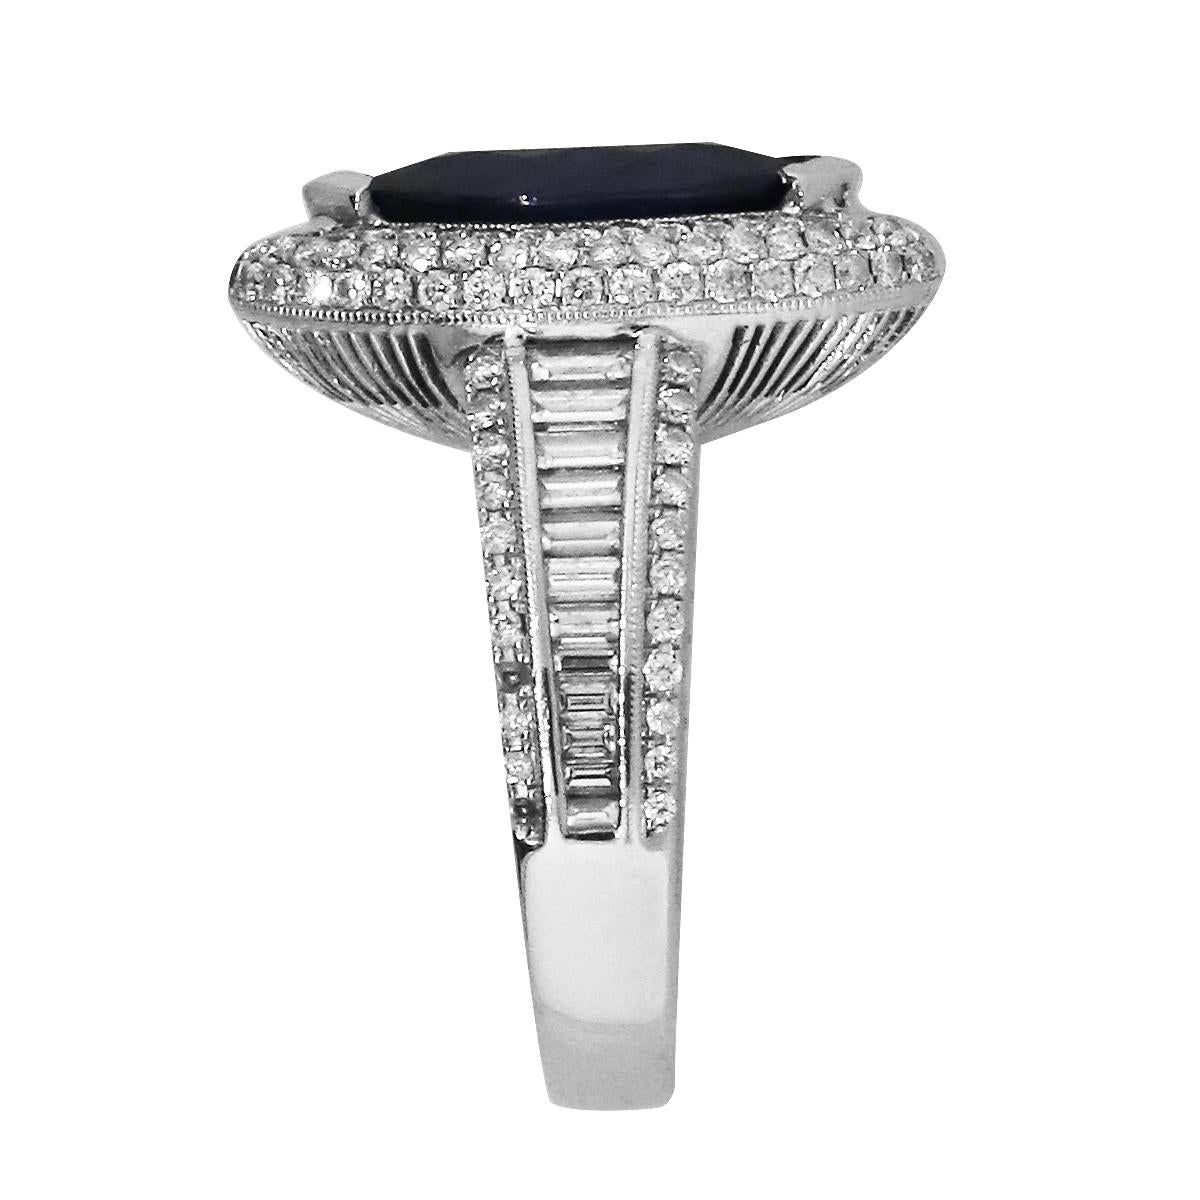 Material: 18k White Gold
Diamond Details: Approximately 1.50ctw round brilliant diamonds. Diamonds are G/H in color and VS in clarity
Gemstone Details: Approximately 2ct Marquise shape sapphire gemstone
Ring Size: 5
Ring Measurements: 0.80″ x 0.70″